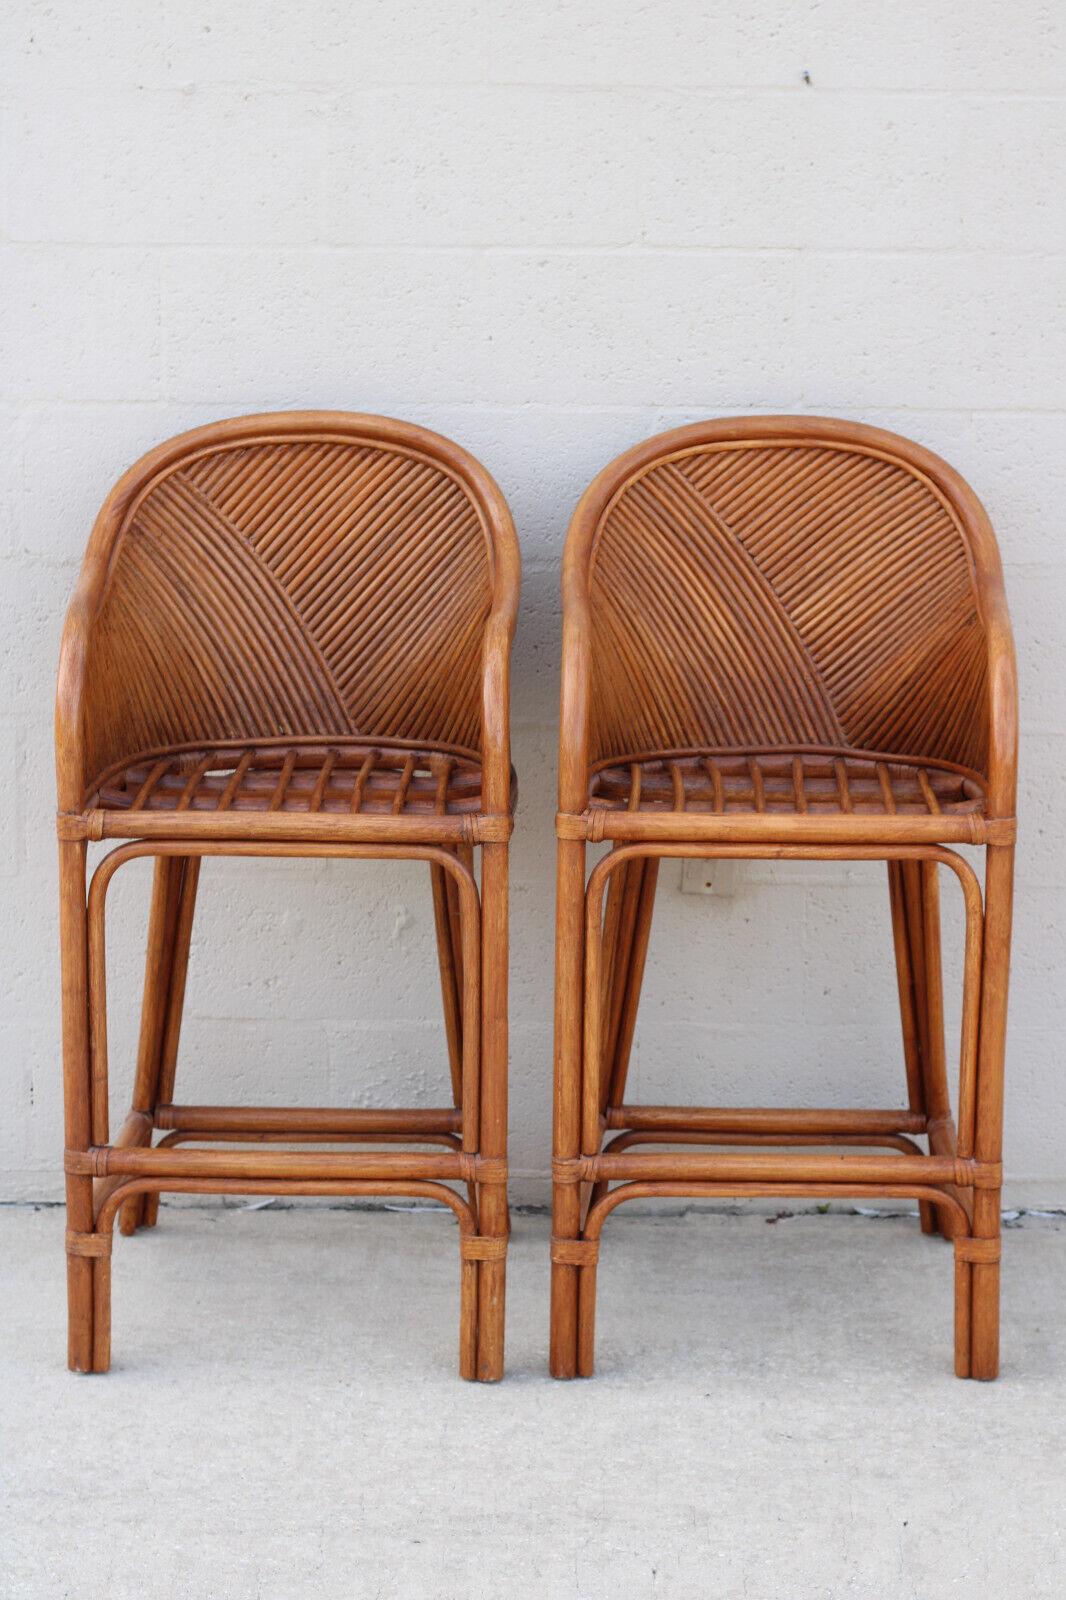 Set of Four Split Reed Rattan Bar Stools In Good Condition For Sale In Vero Beach, FL